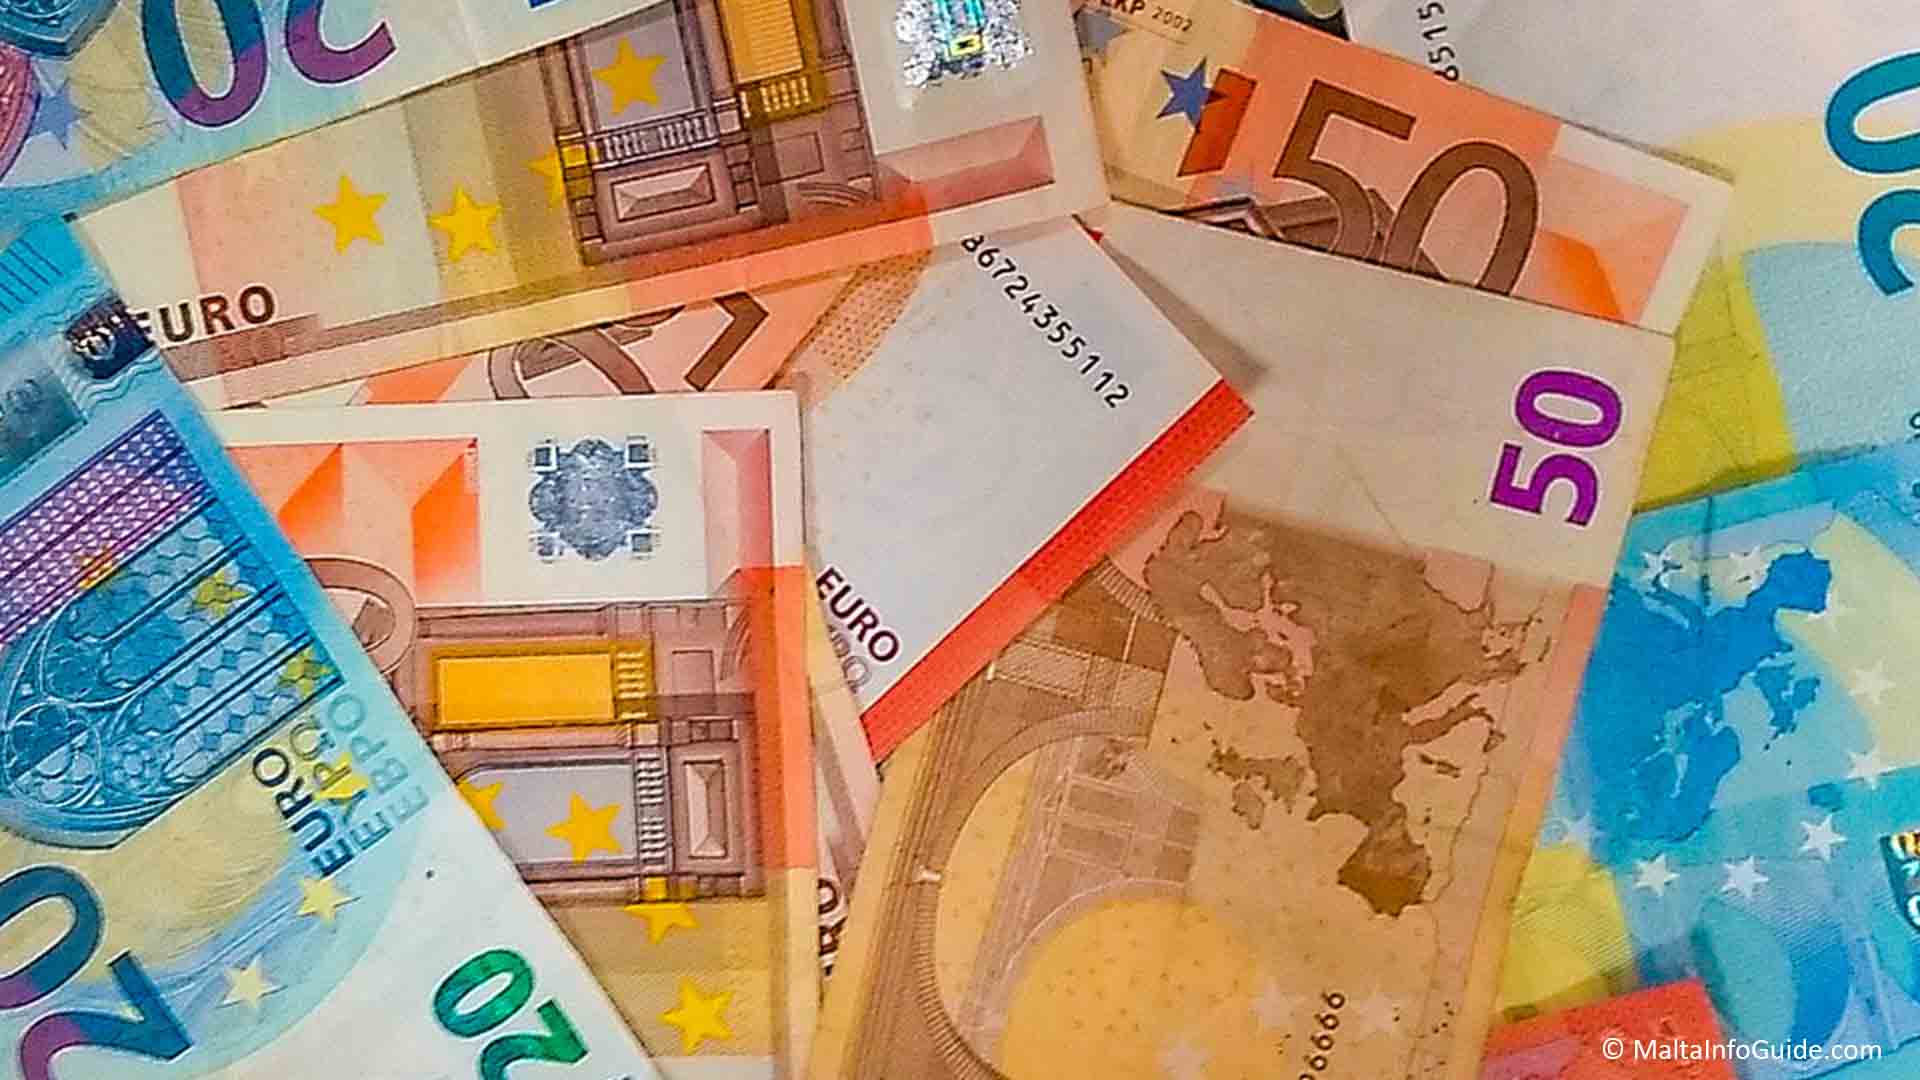 The €20 and €50 Euro notes of the currency in Malta